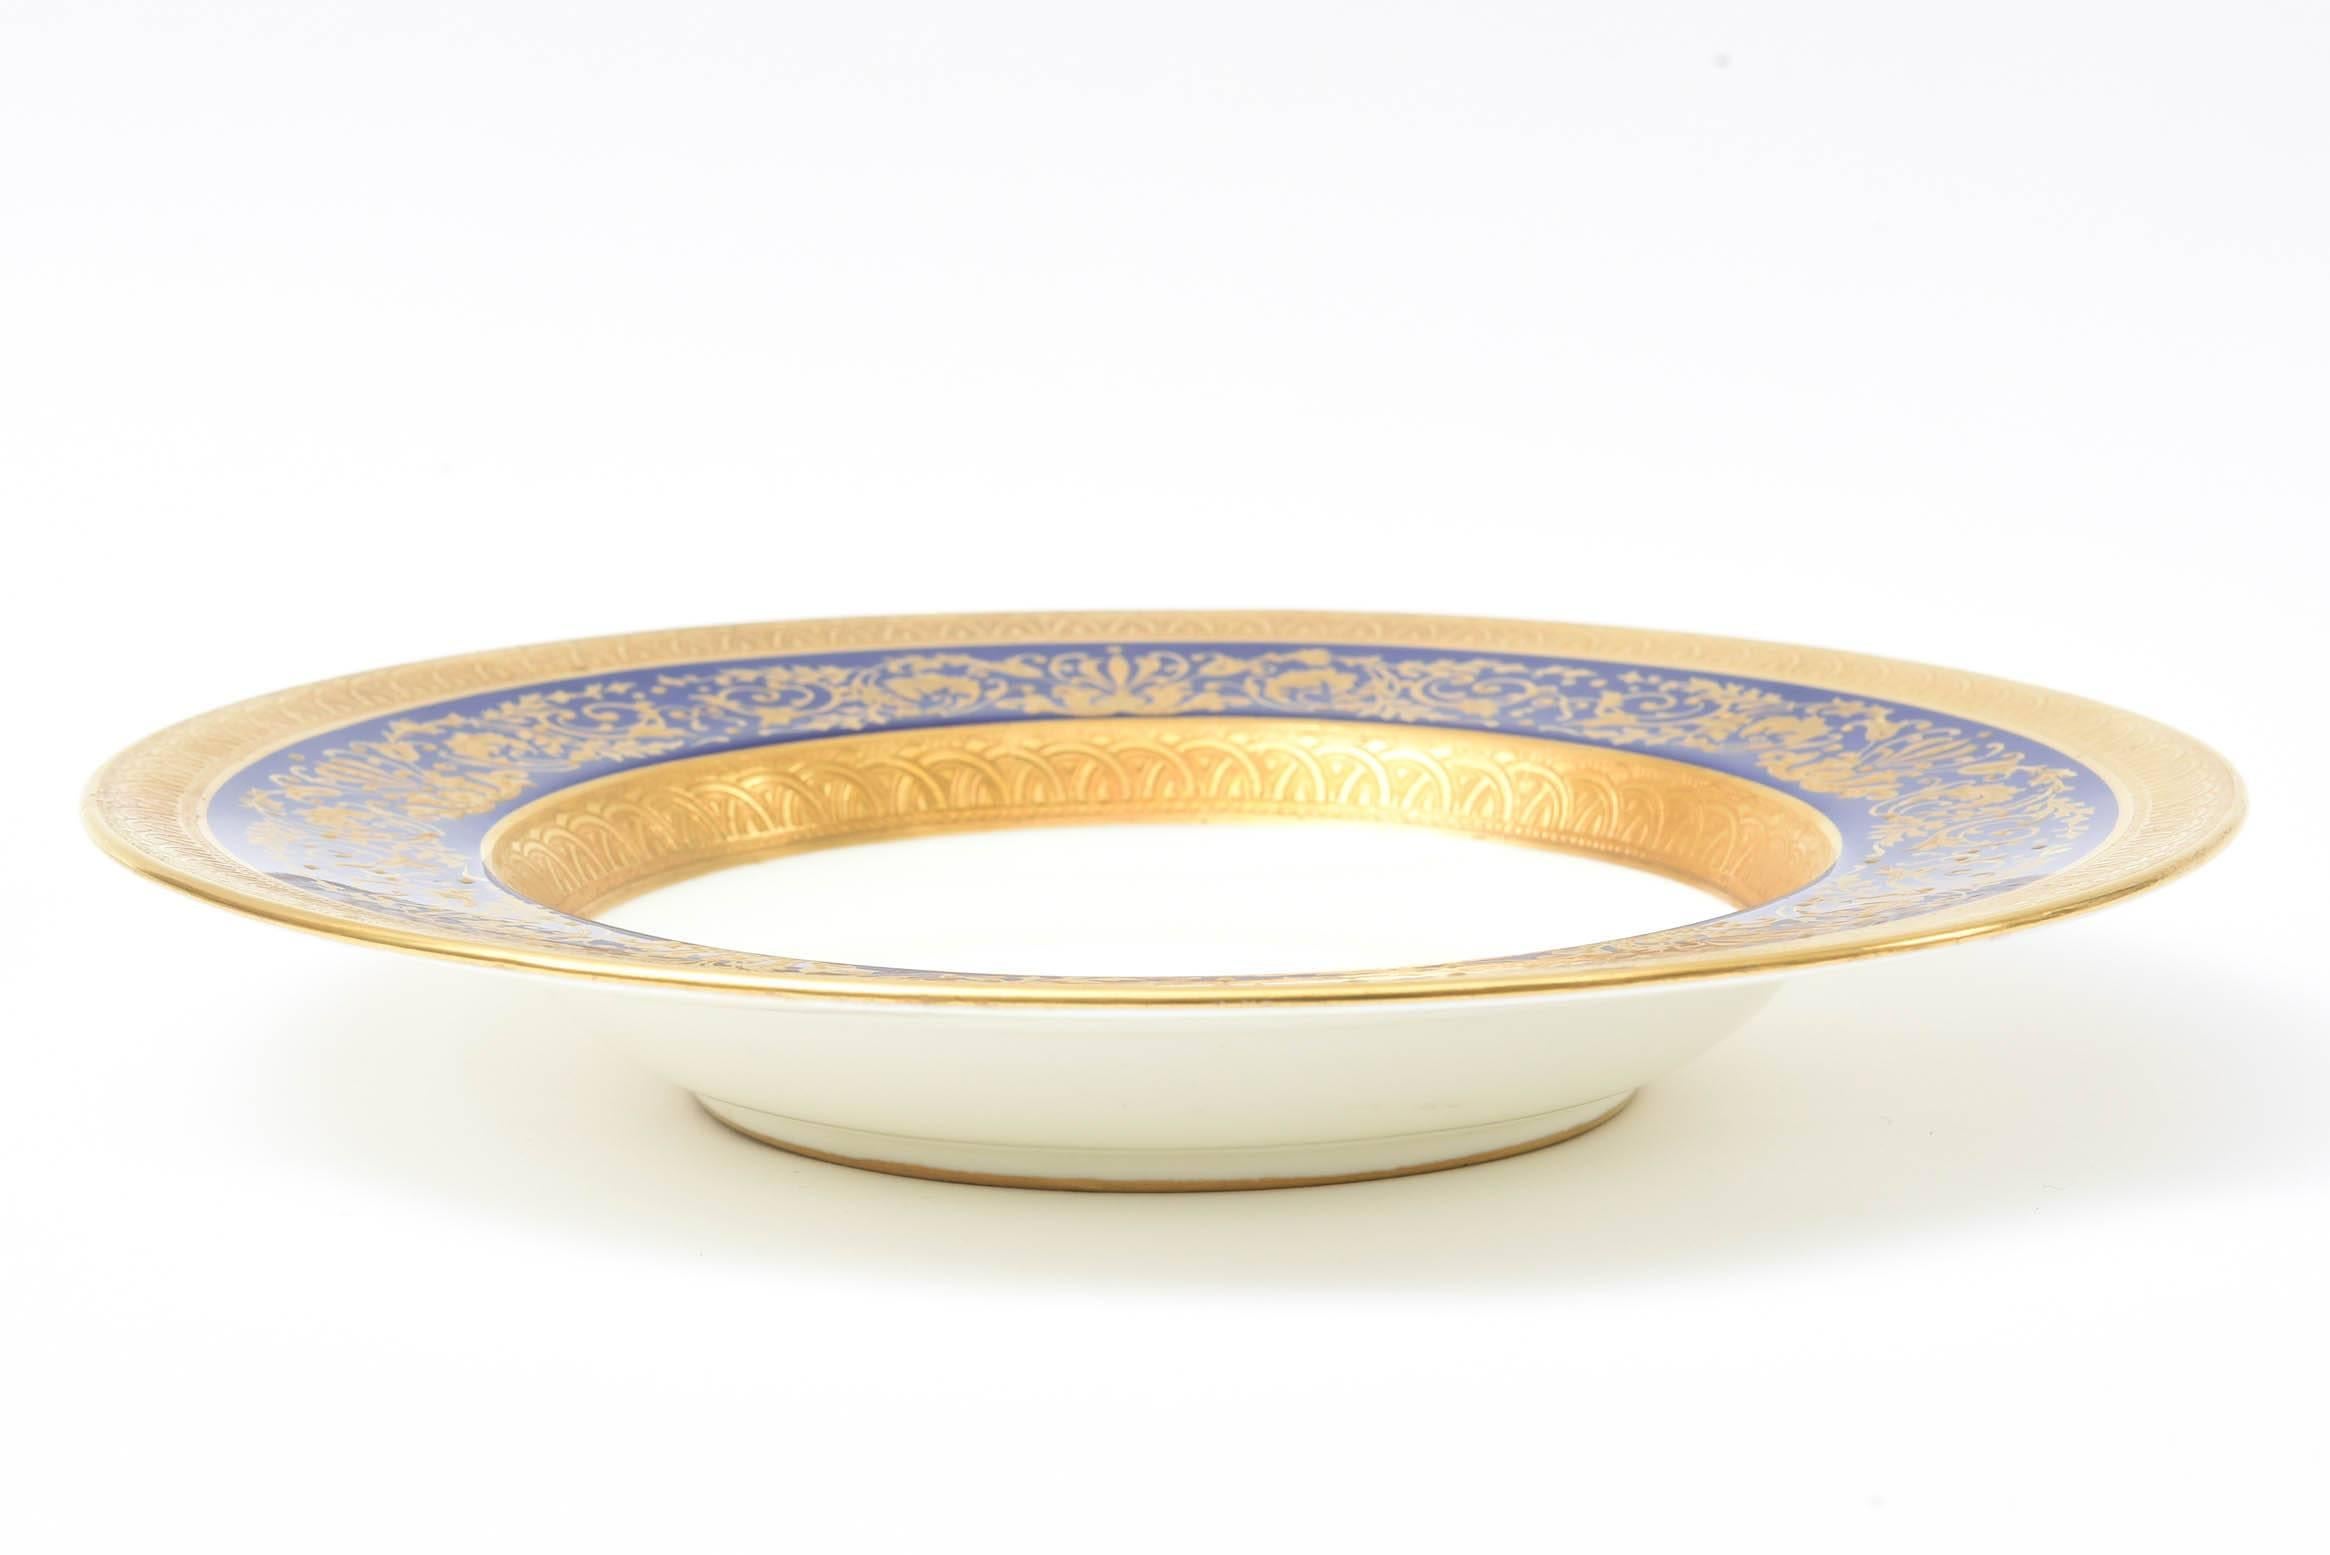 English 12 Tiffany Cobalt Blue and Heavy Gilt Encrusted Rimmed Soup Bowls, Antique